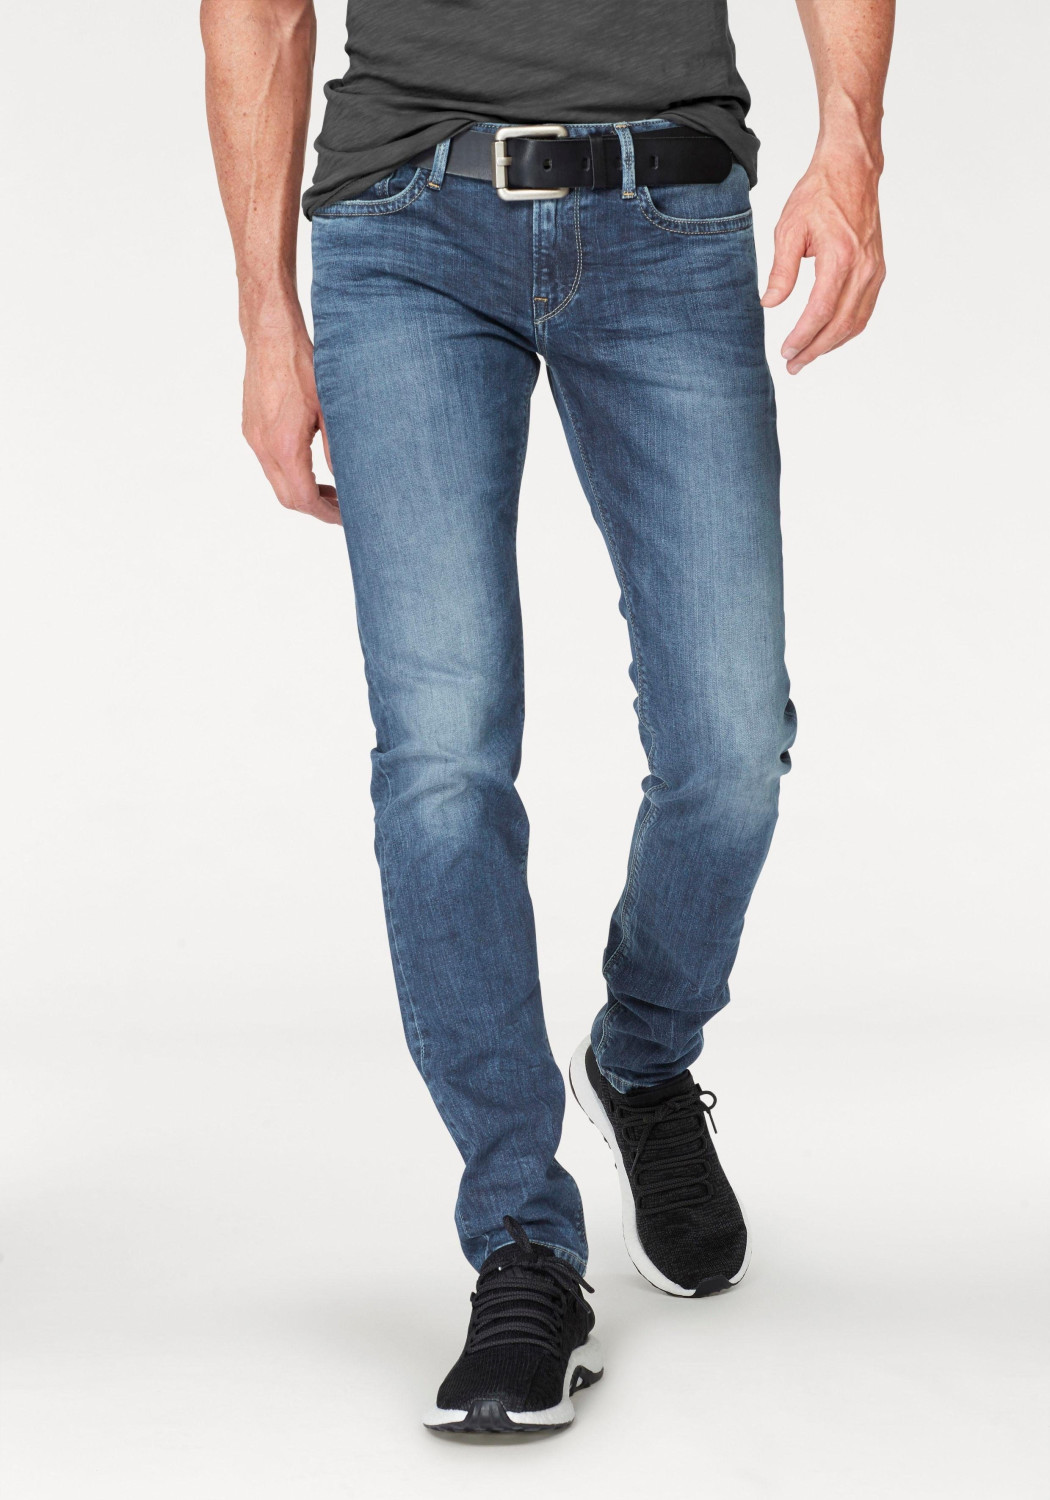 Buy Pepe Jeans Hatch Slim Fit Jeans (PM200823Z234) from £46.49 (Today ...